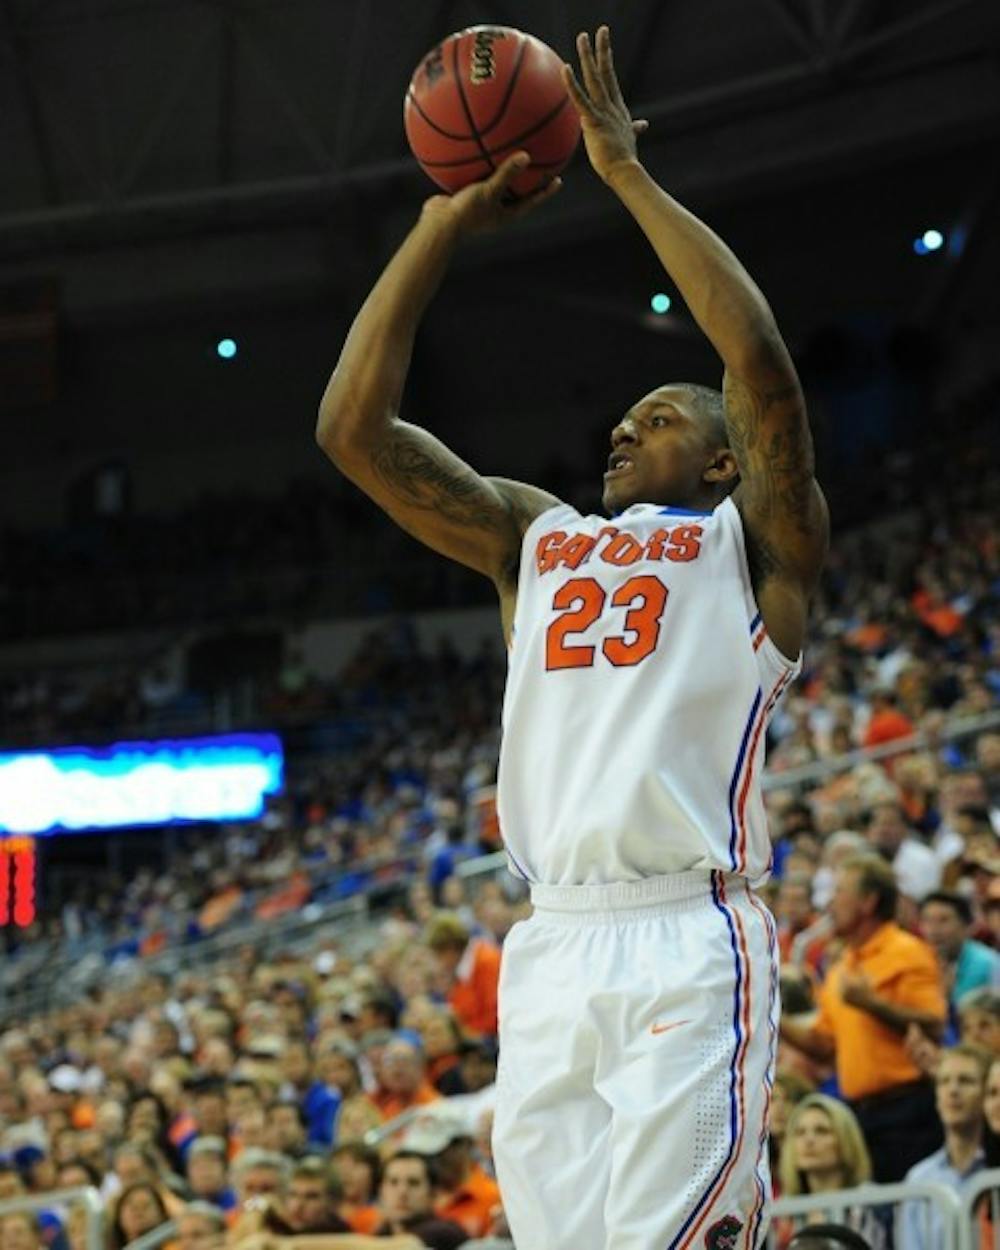 <p>Freshman guard Brad Beal scored a game-high 21 points and added six rebounds in the Gators' 82-64 win against the Seminoles on Thursday at the O'Connell Center.</p>